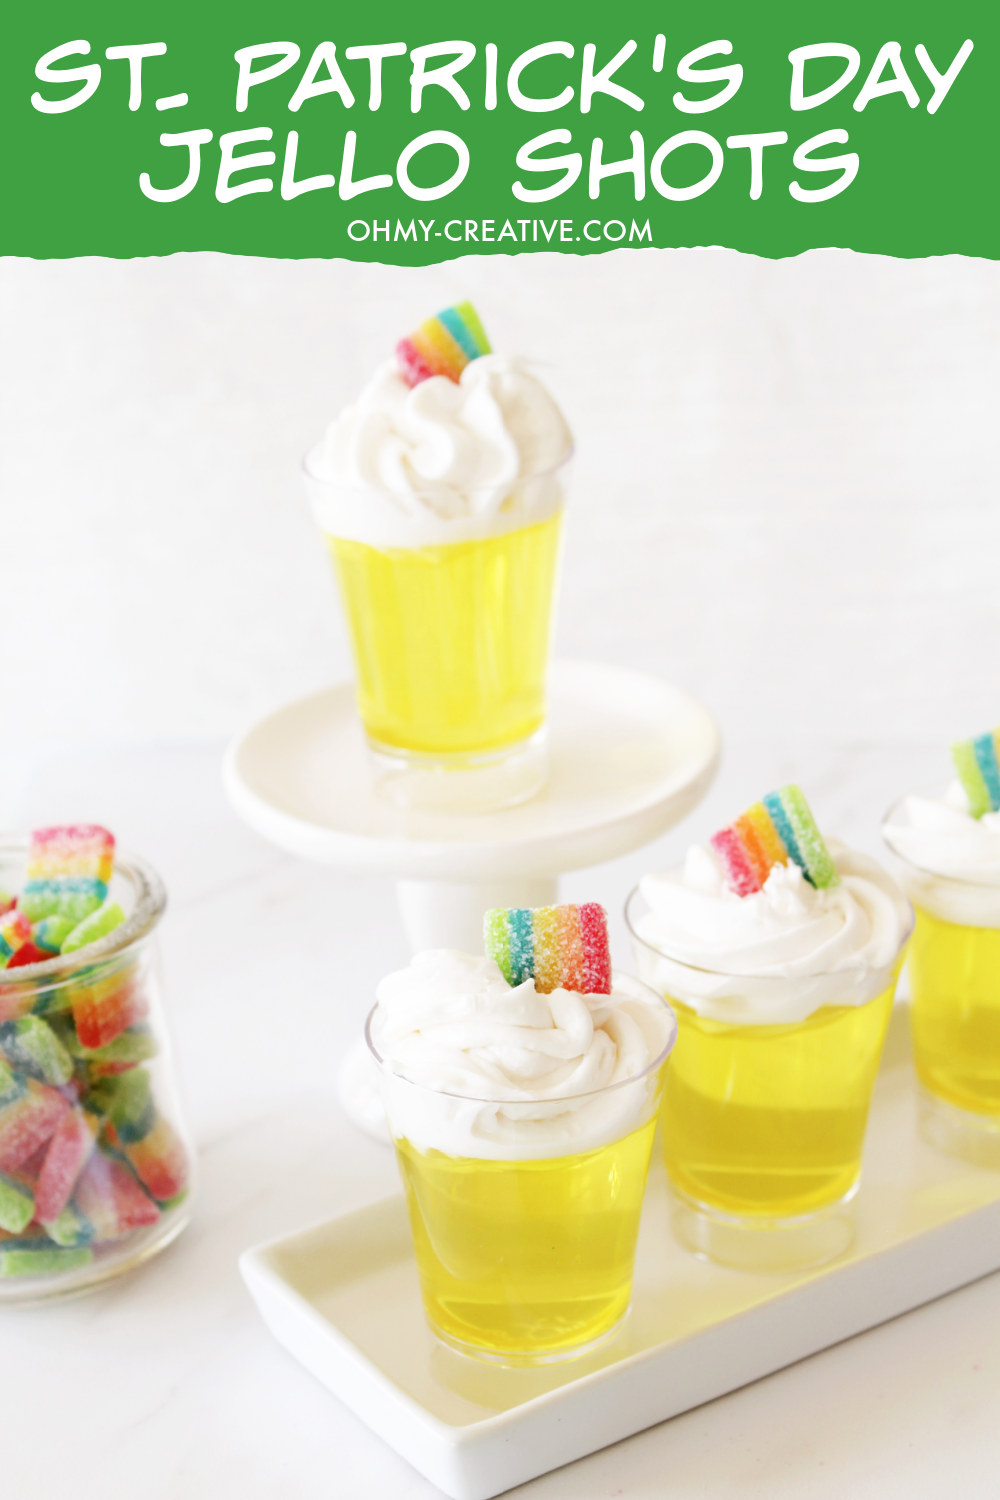 Pin image with St. Patrick's DayPot o' gold jello shots sitting on a white tray. Jar of rainbow candy sitting in the background.